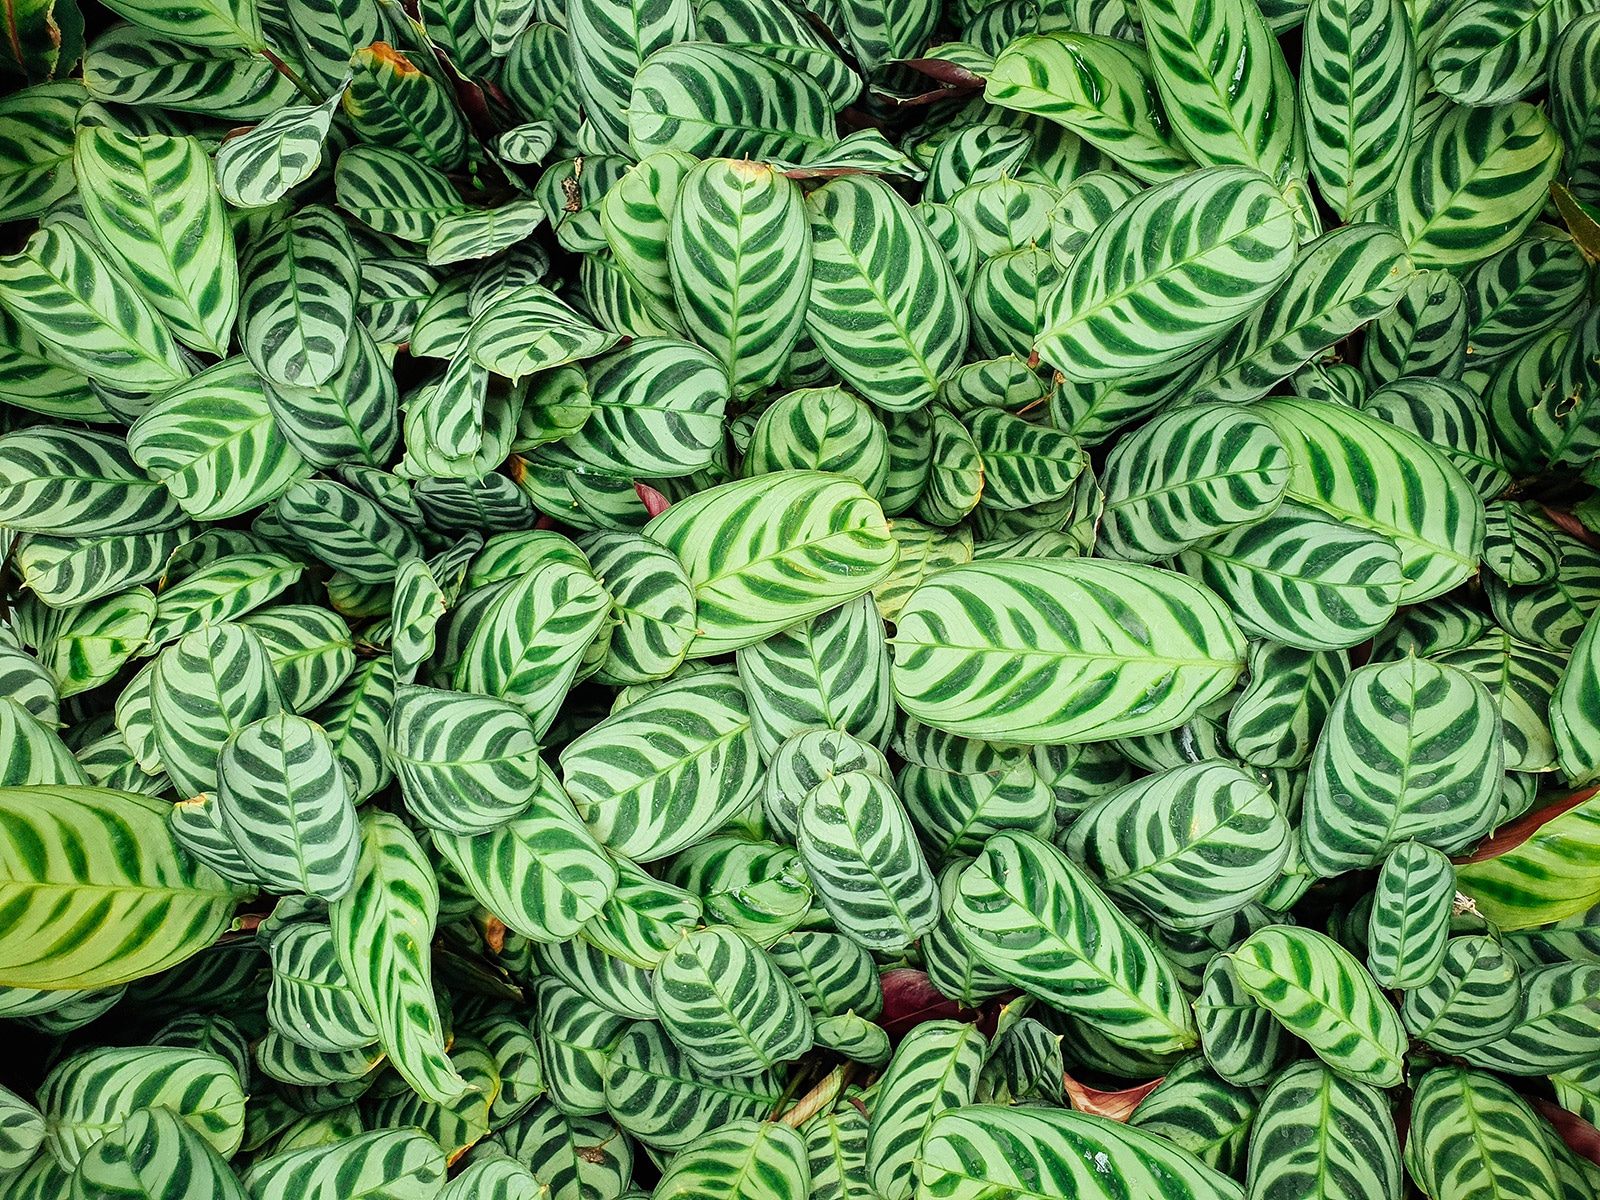 Overhead view of ctenanthe leaves showing their characteristic fishbone pattern